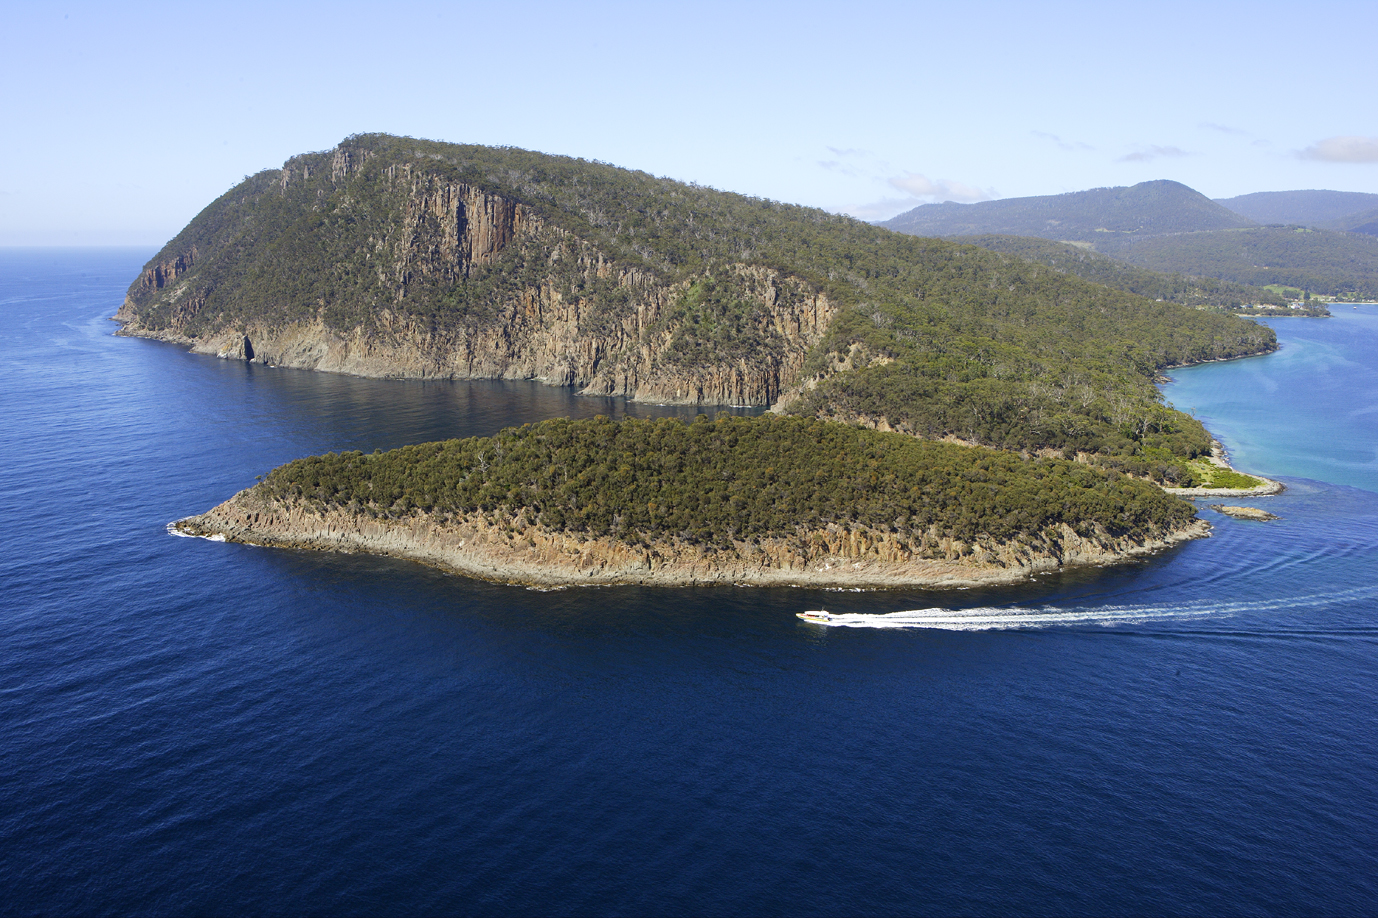 Bruny Island Cruises 3 Hour Cruise with Kettering Bus Pickup